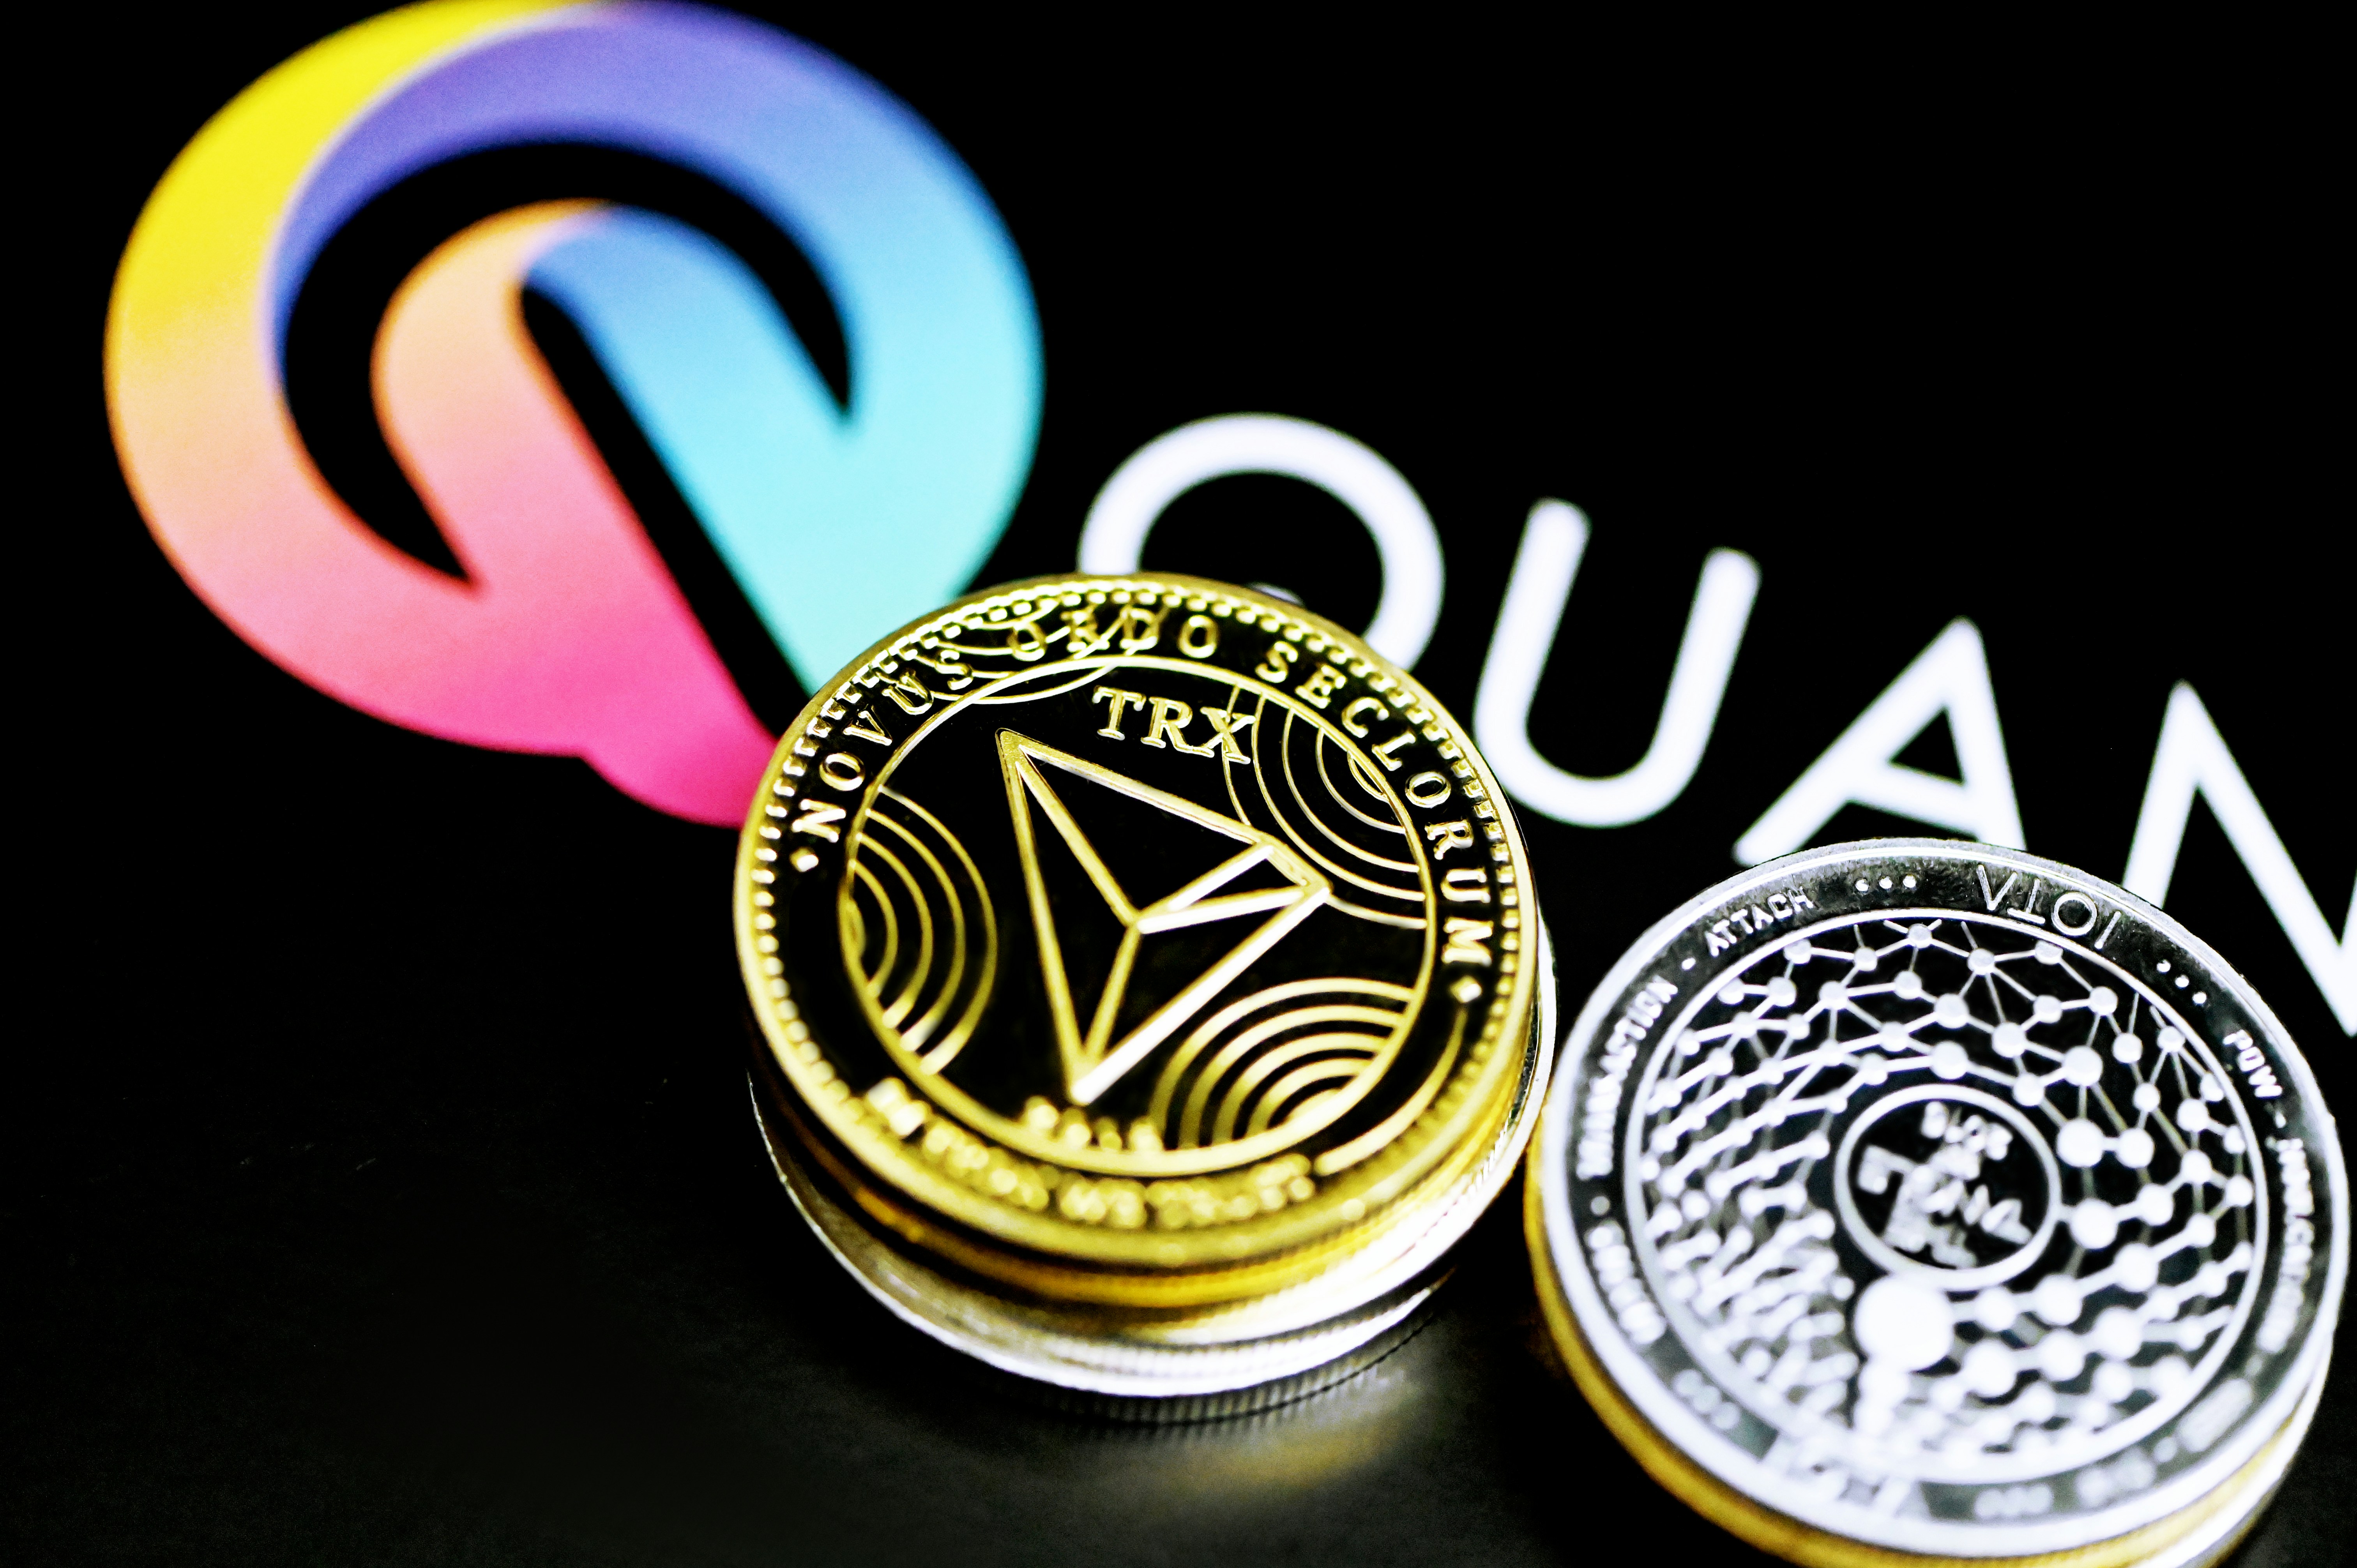 Tron coin and IOTA coin are together on the Quantitatives logo</p>
<p>” style=”max-width:410px;float:left;padding:10px 10px 10px 0px;border:0px;”></p>
	</div><!-- .entry-content -->

	<footer class=